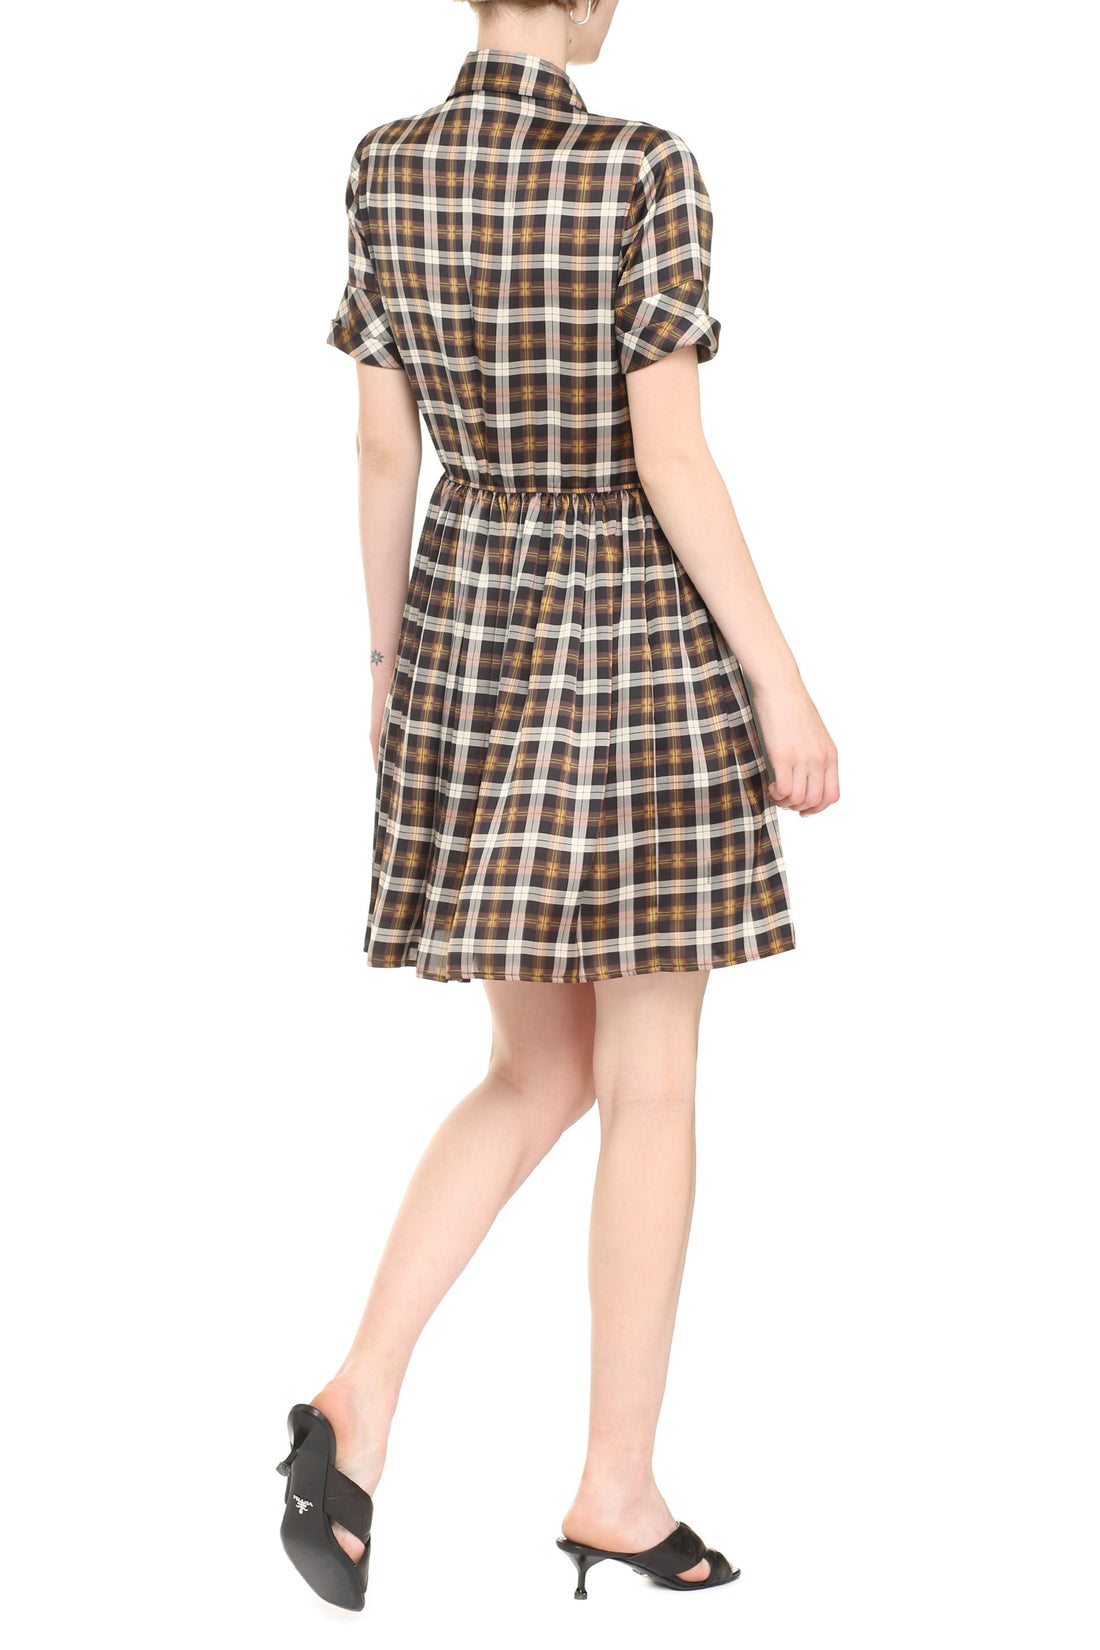 Dsquared2-OUTLET-SALE-Printed shirtdress-ARCHIVIST